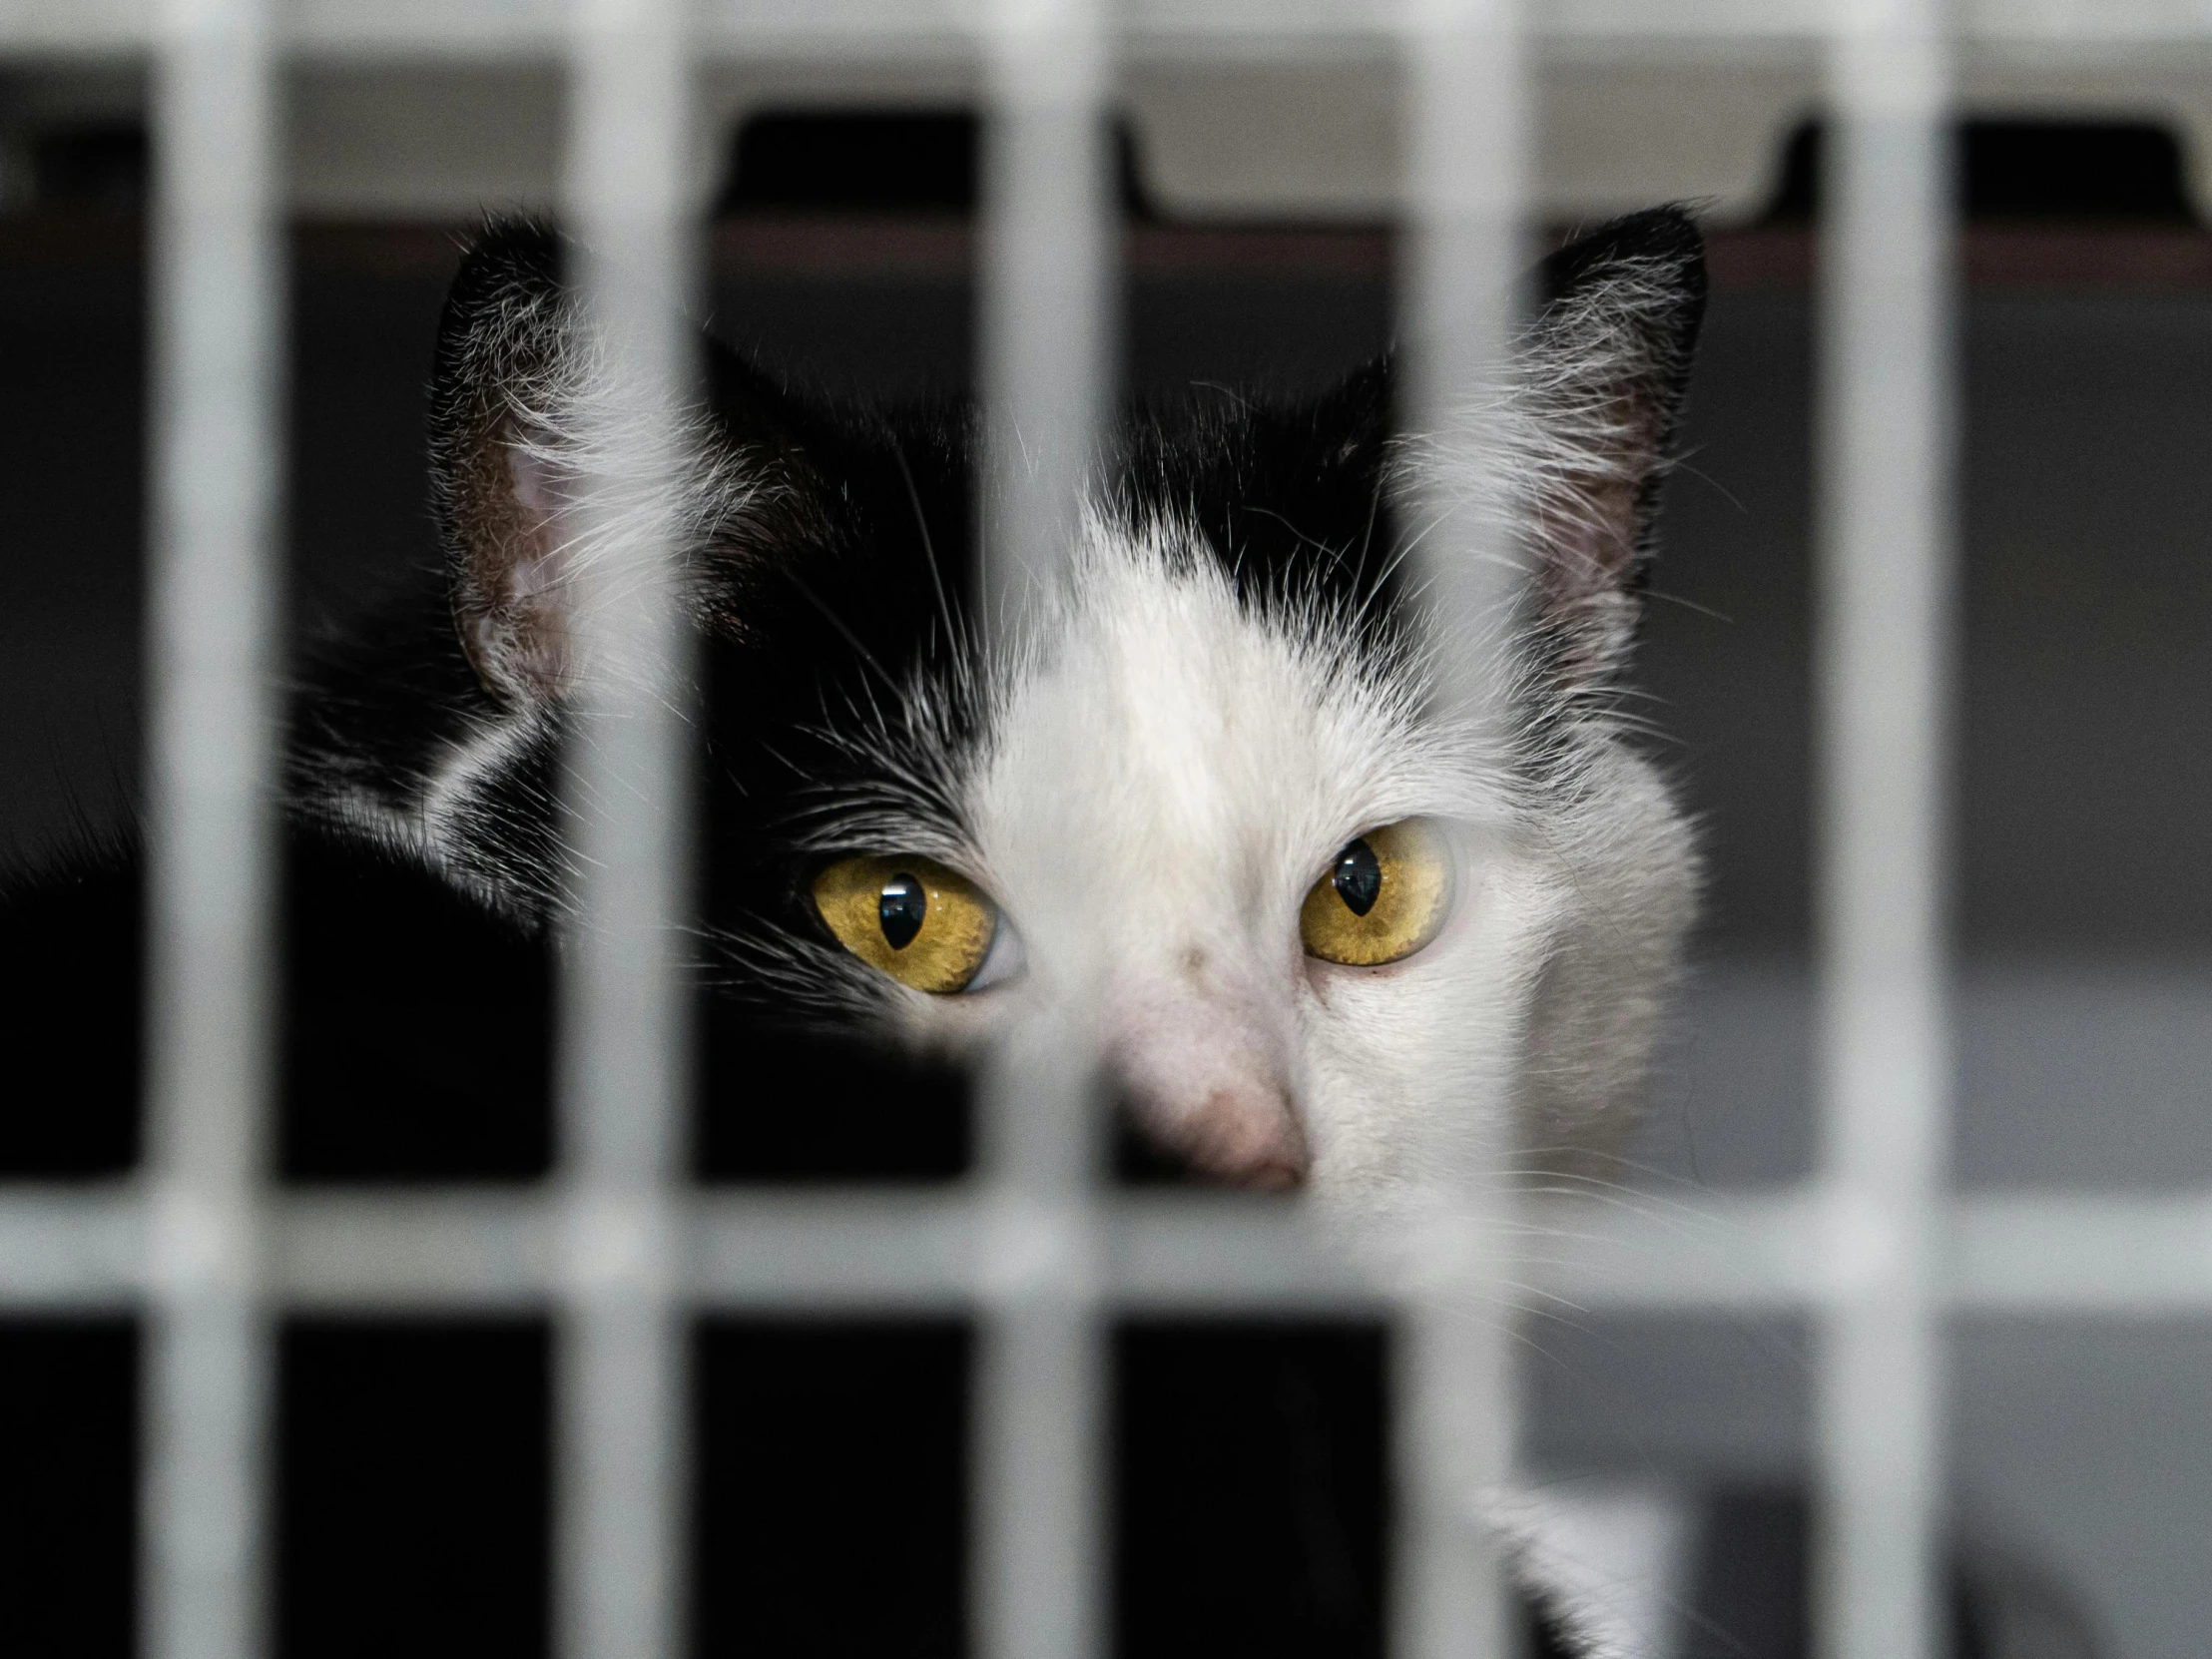 a black and white cat with yellow eyes sitting in a cage